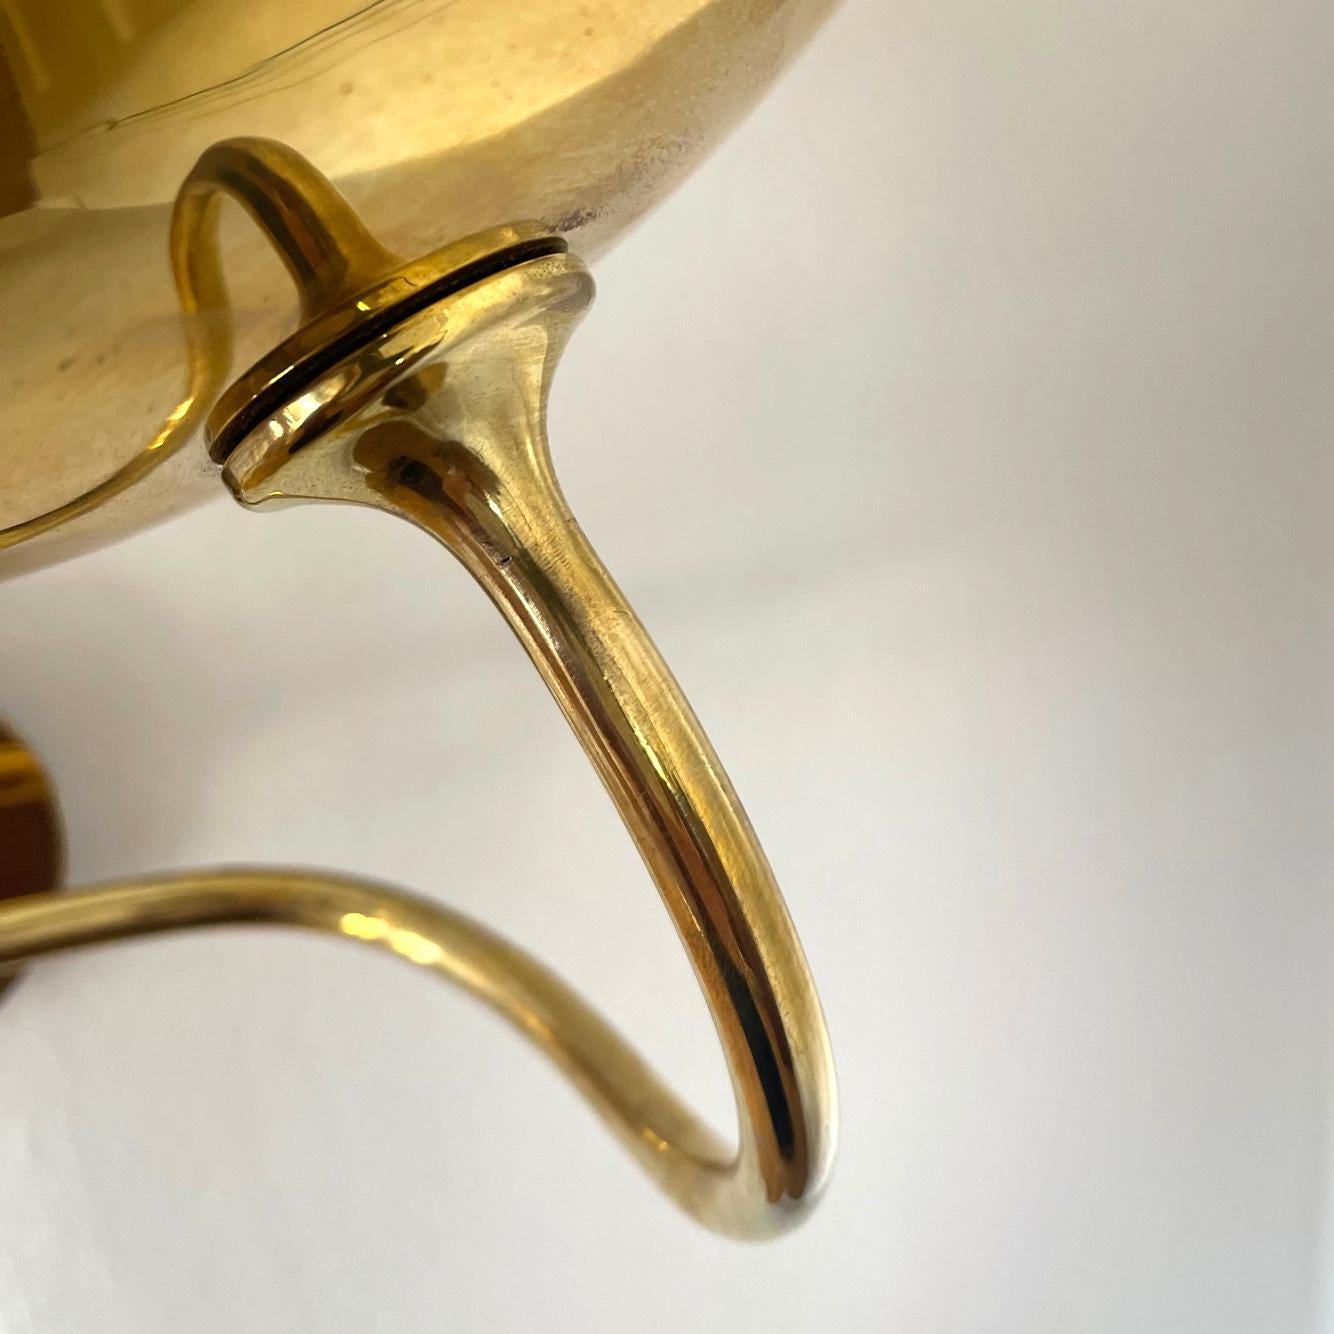 Polished Early Arne Jacobsen Brass Wall Lamp, Denmark For Sale